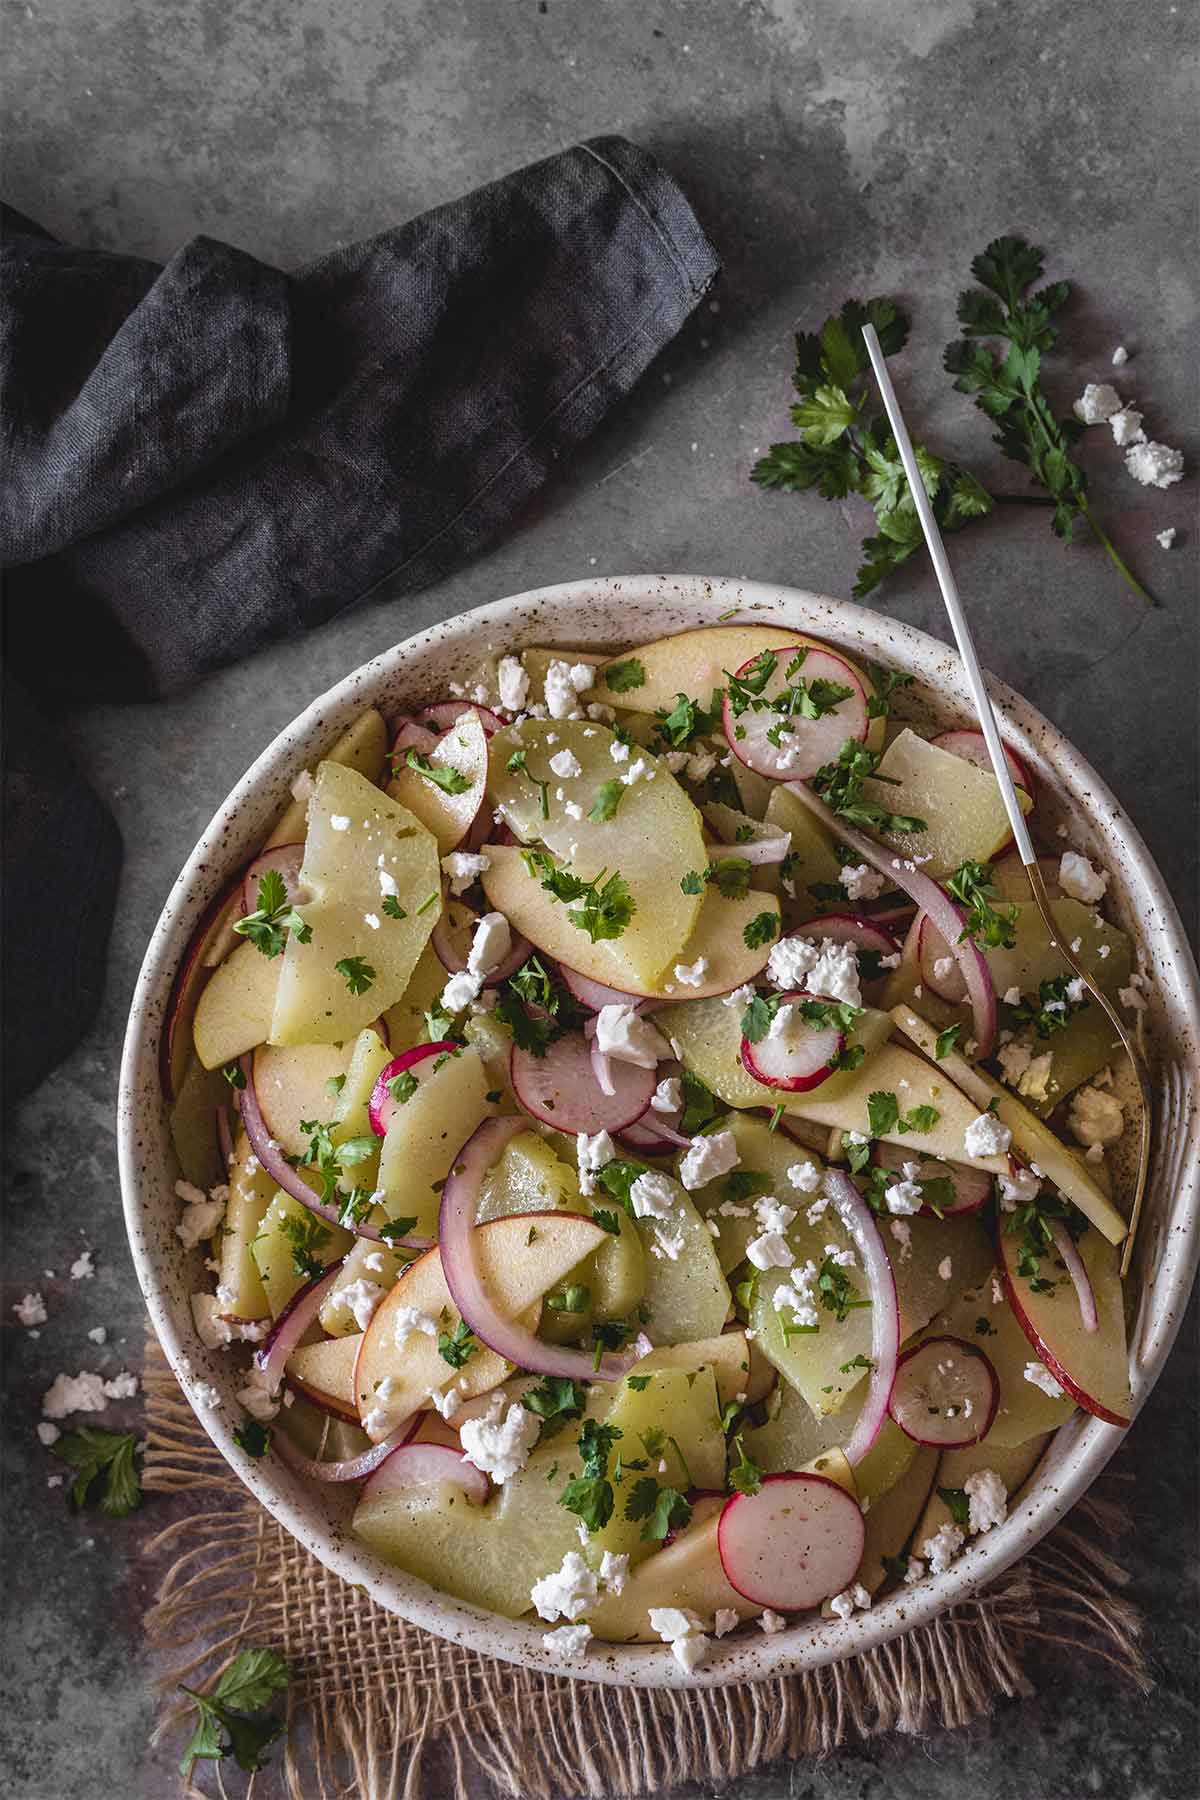 Chayote salad with apple and radishes in a bowl